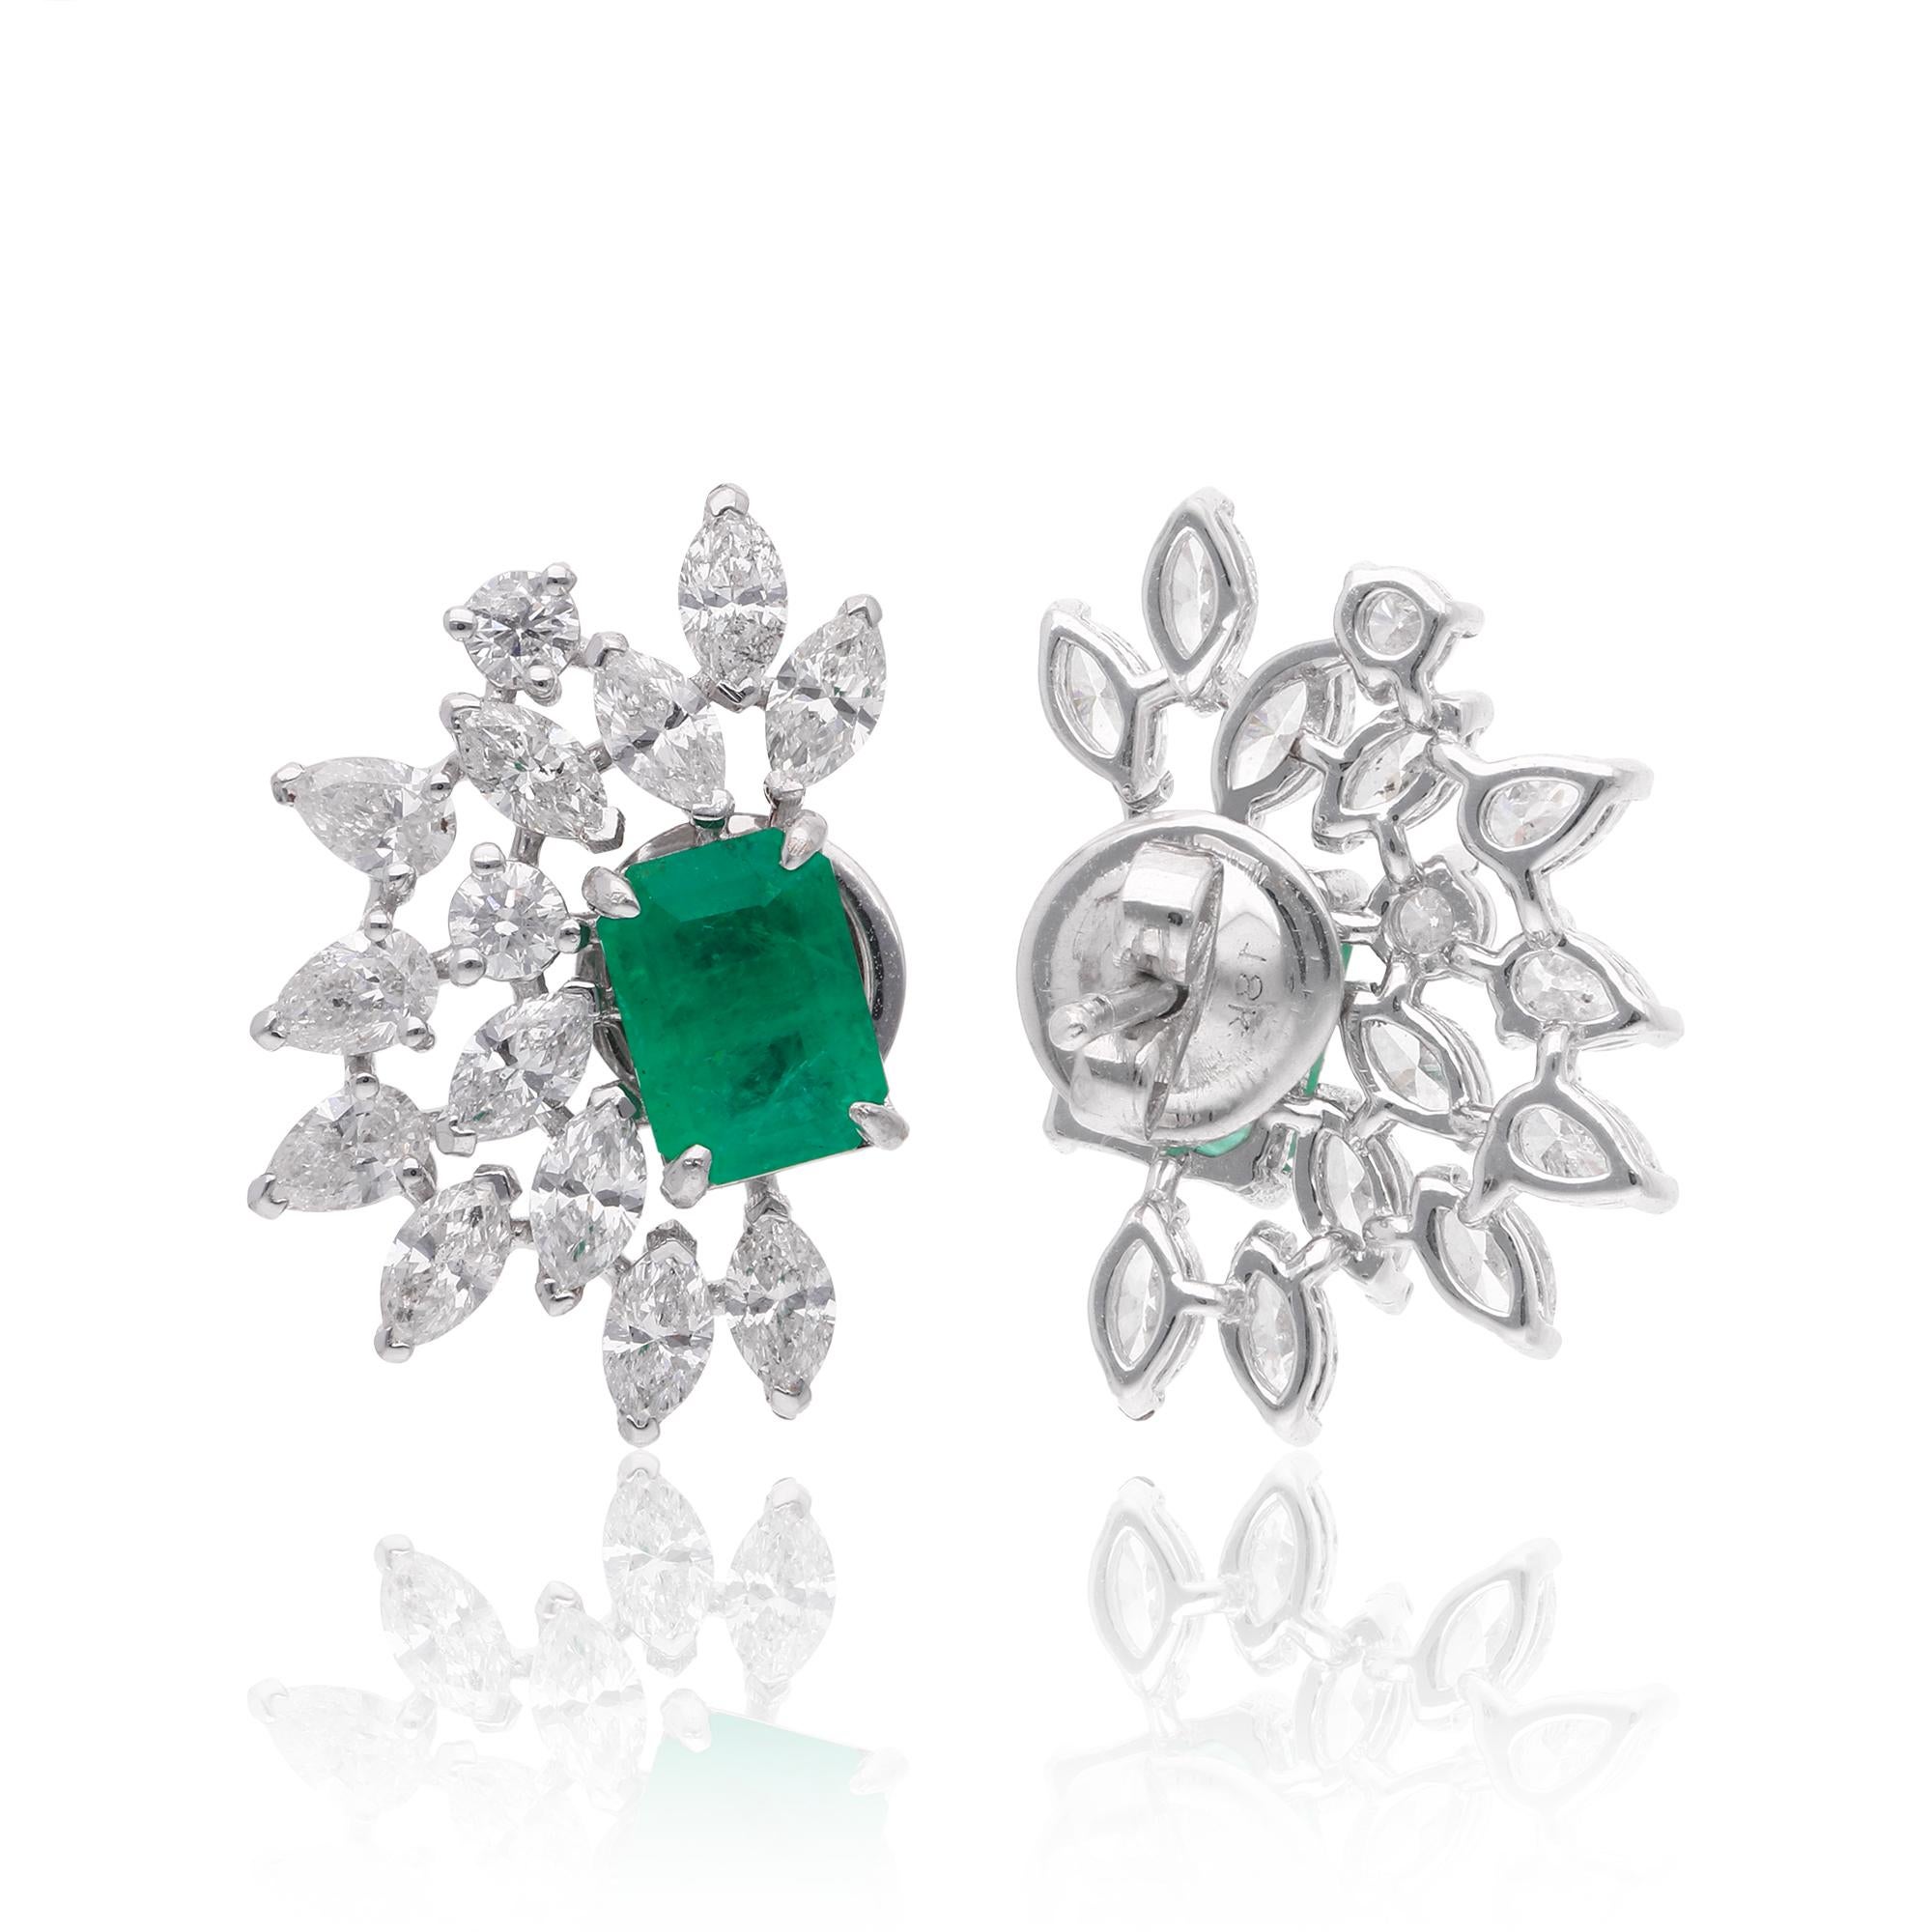 Item Code :- SEE-12816
Gross Wt. :- 6.07 gm
18k Solid White Gold Wt. :- 5.22 gm
Natural Diamond Wt. :- 2.40 Ct. ( AVERAGE DIAMOND CLARITY SI1-SI2 & COLOR H-I )
Zambian Emerald Wt. :- 1.86 Ct.
Earrings Size :- 20 mm approx.

✦